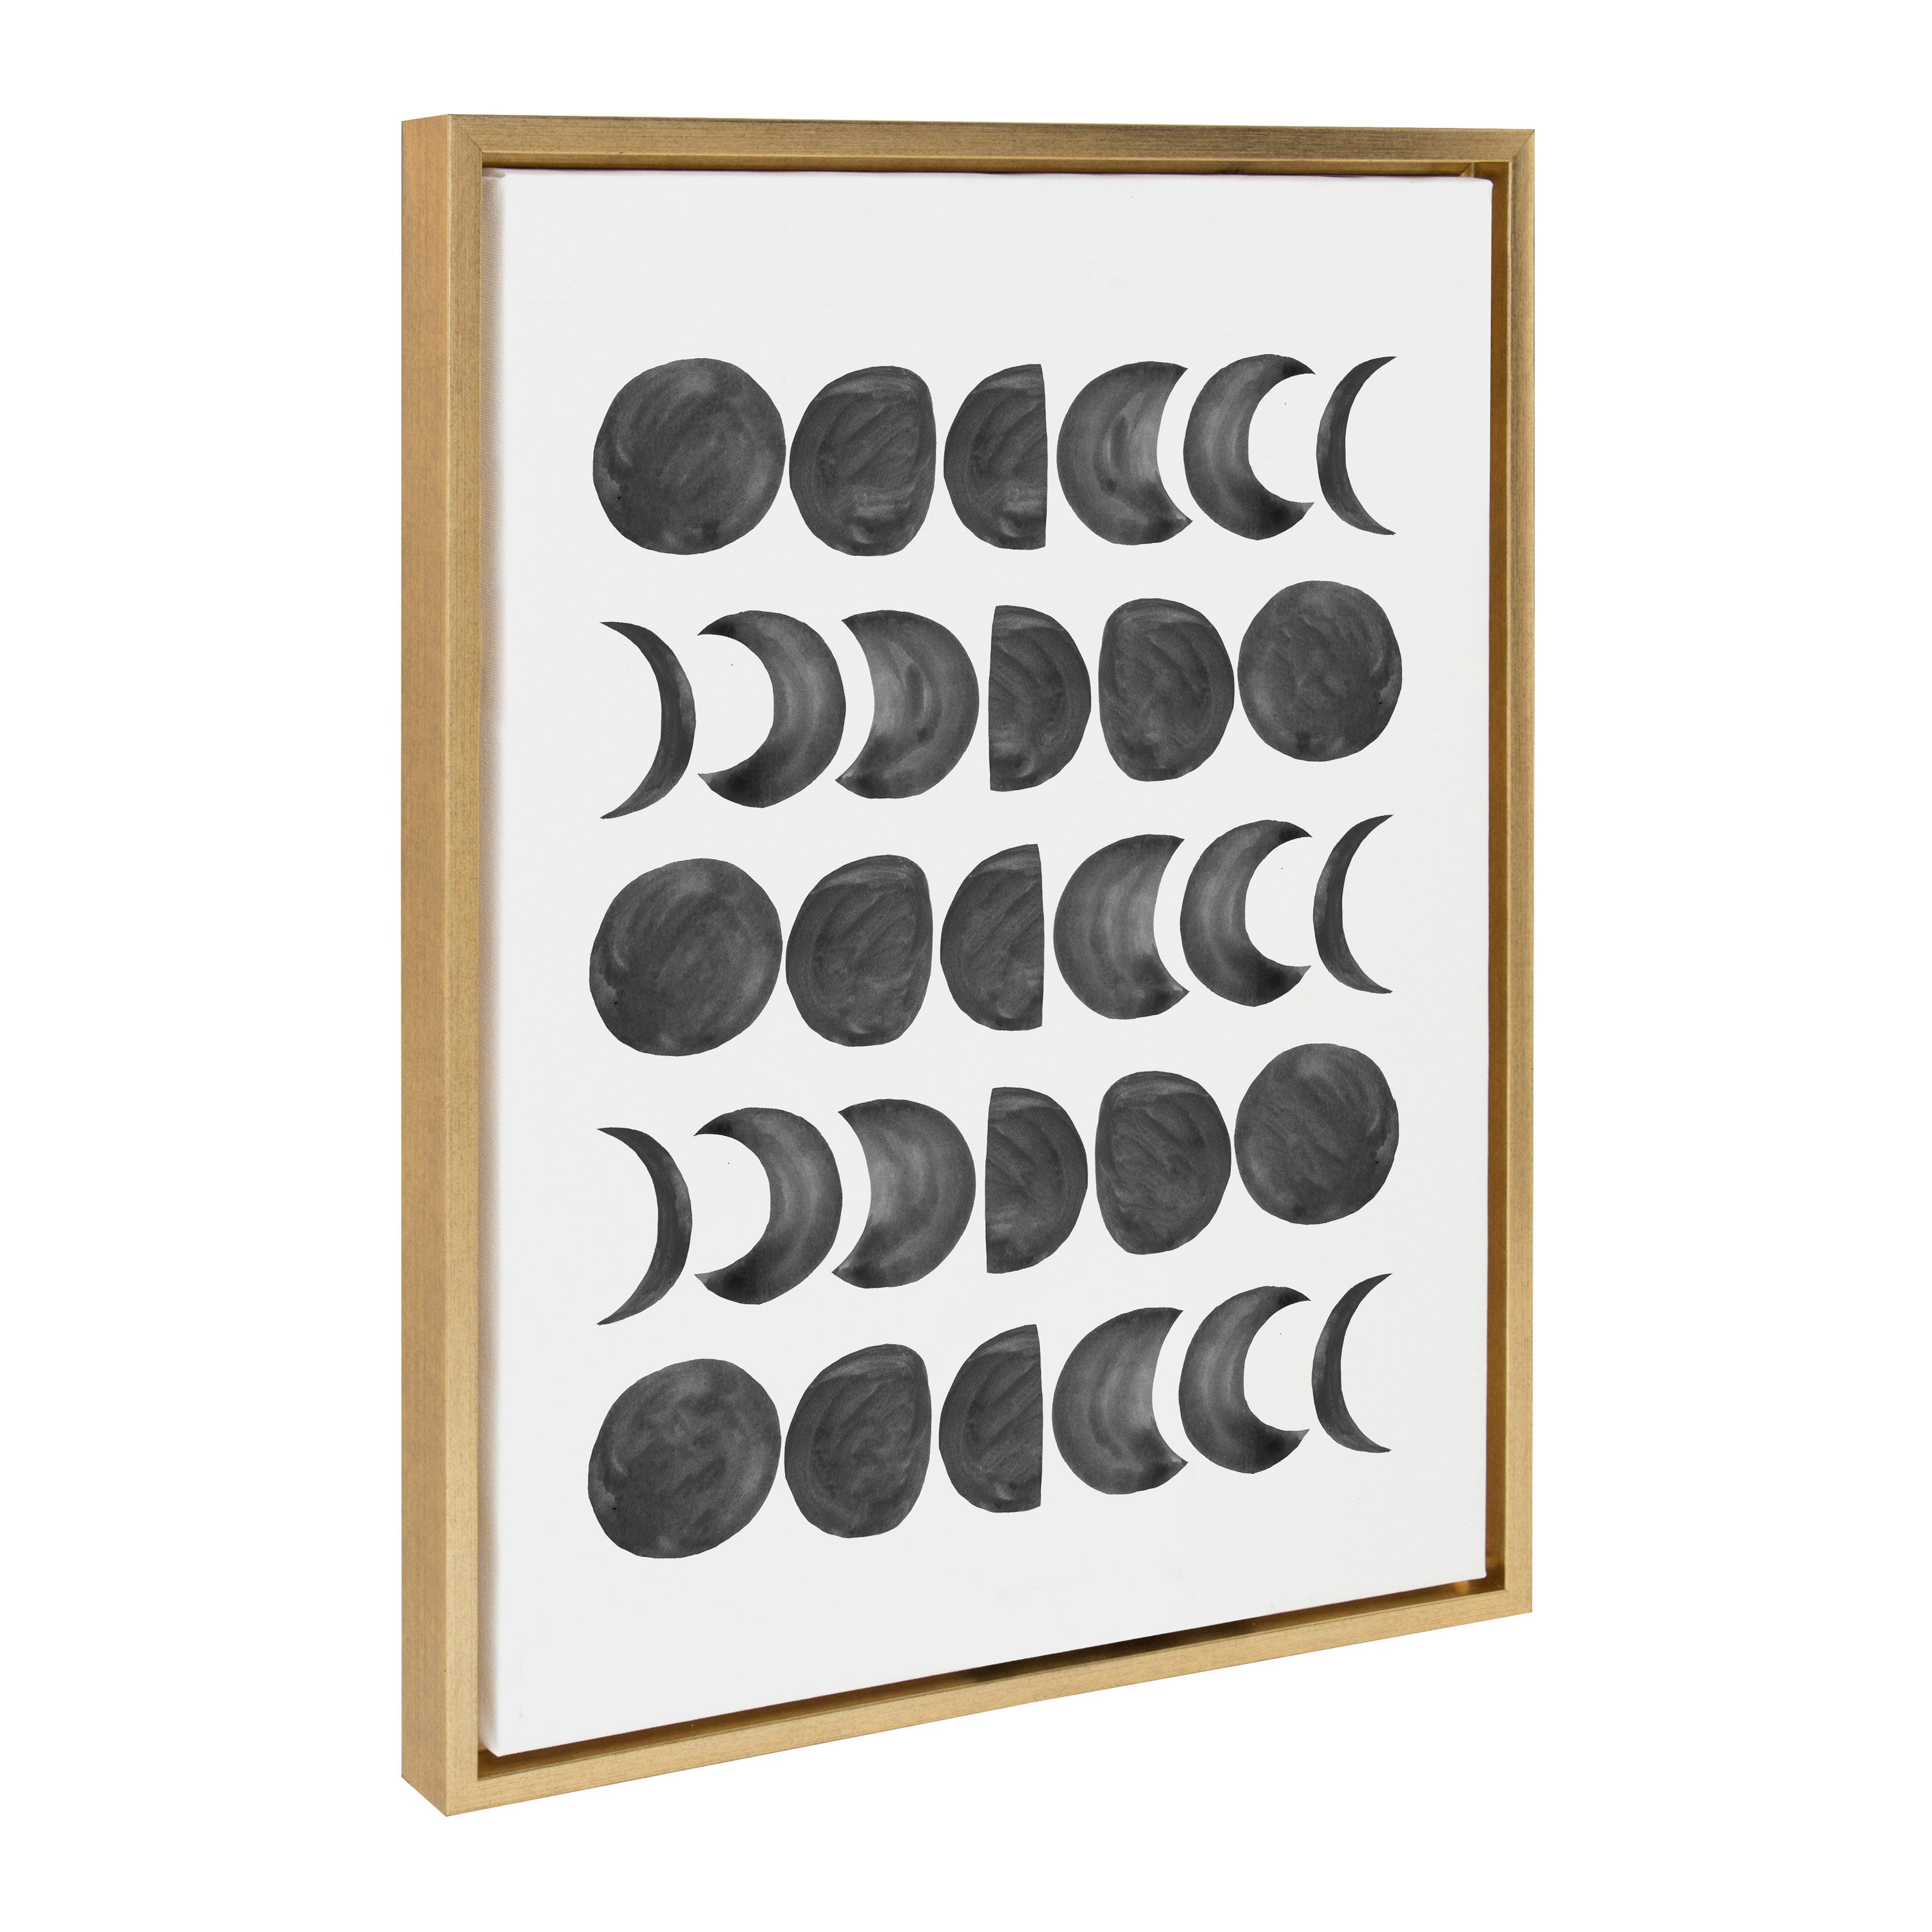 Sylvie 901 Moon Phases Black on White Framed Canvas by Teju Reval of SnazzyHues